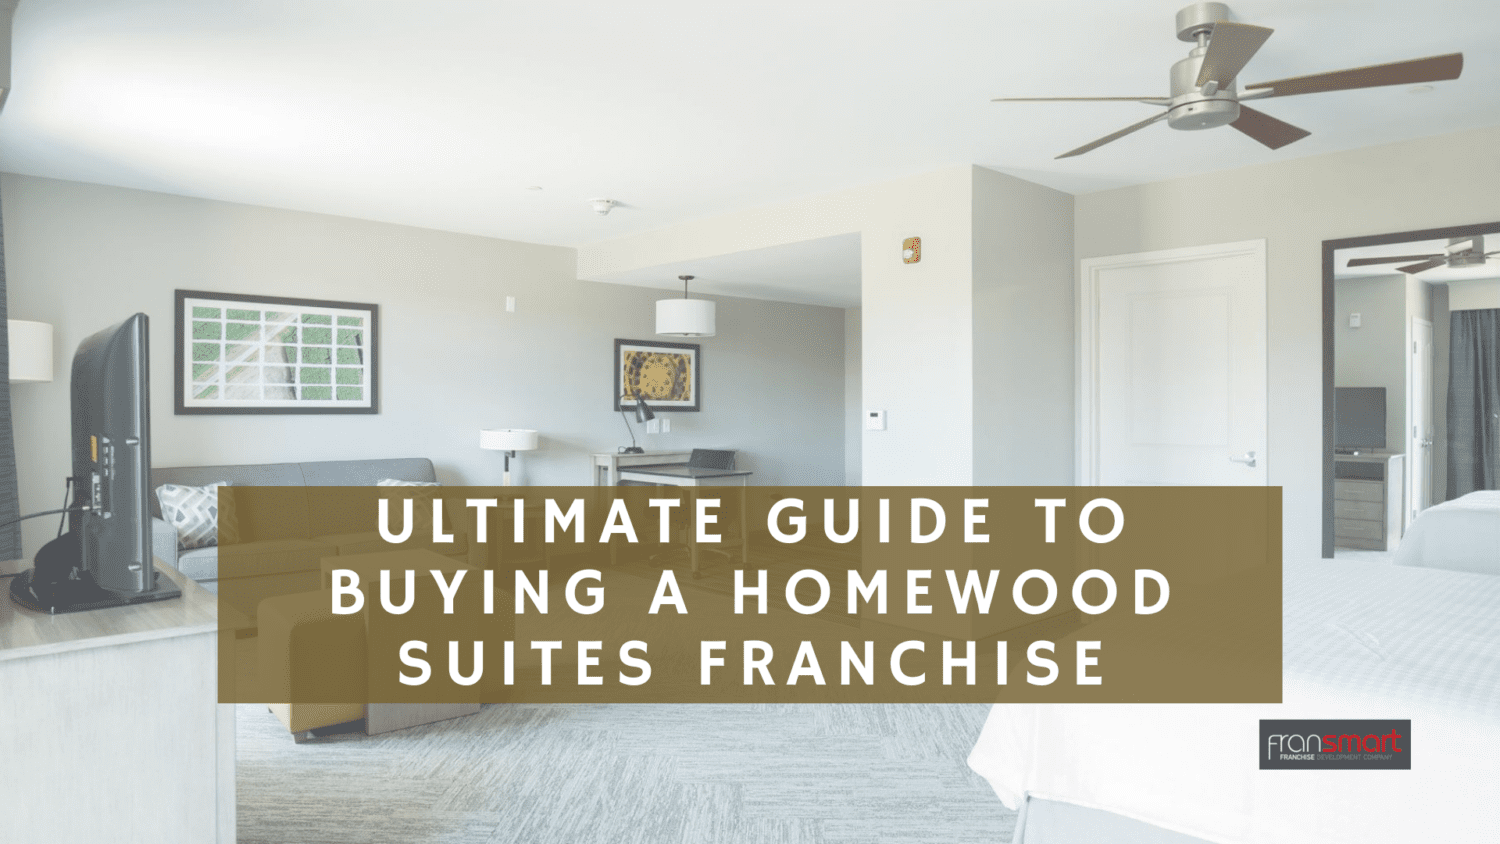 Guide to Buying a Homewood Suites Franchise